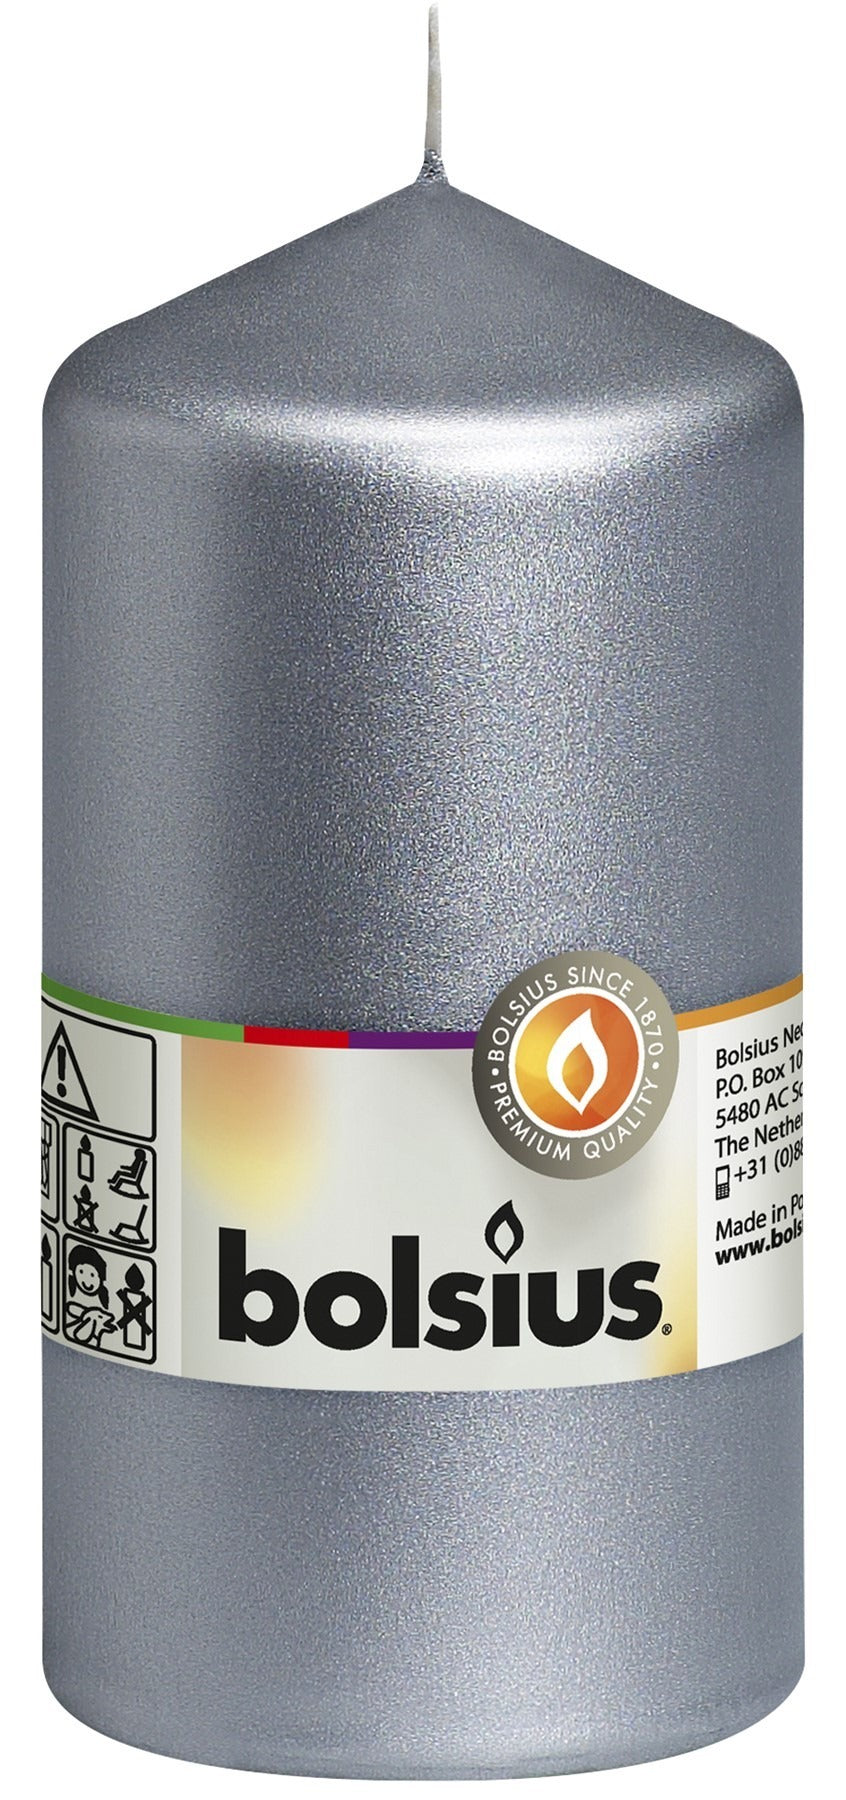 View Silver Bolsius Pillar Candle 130mm x68mm information